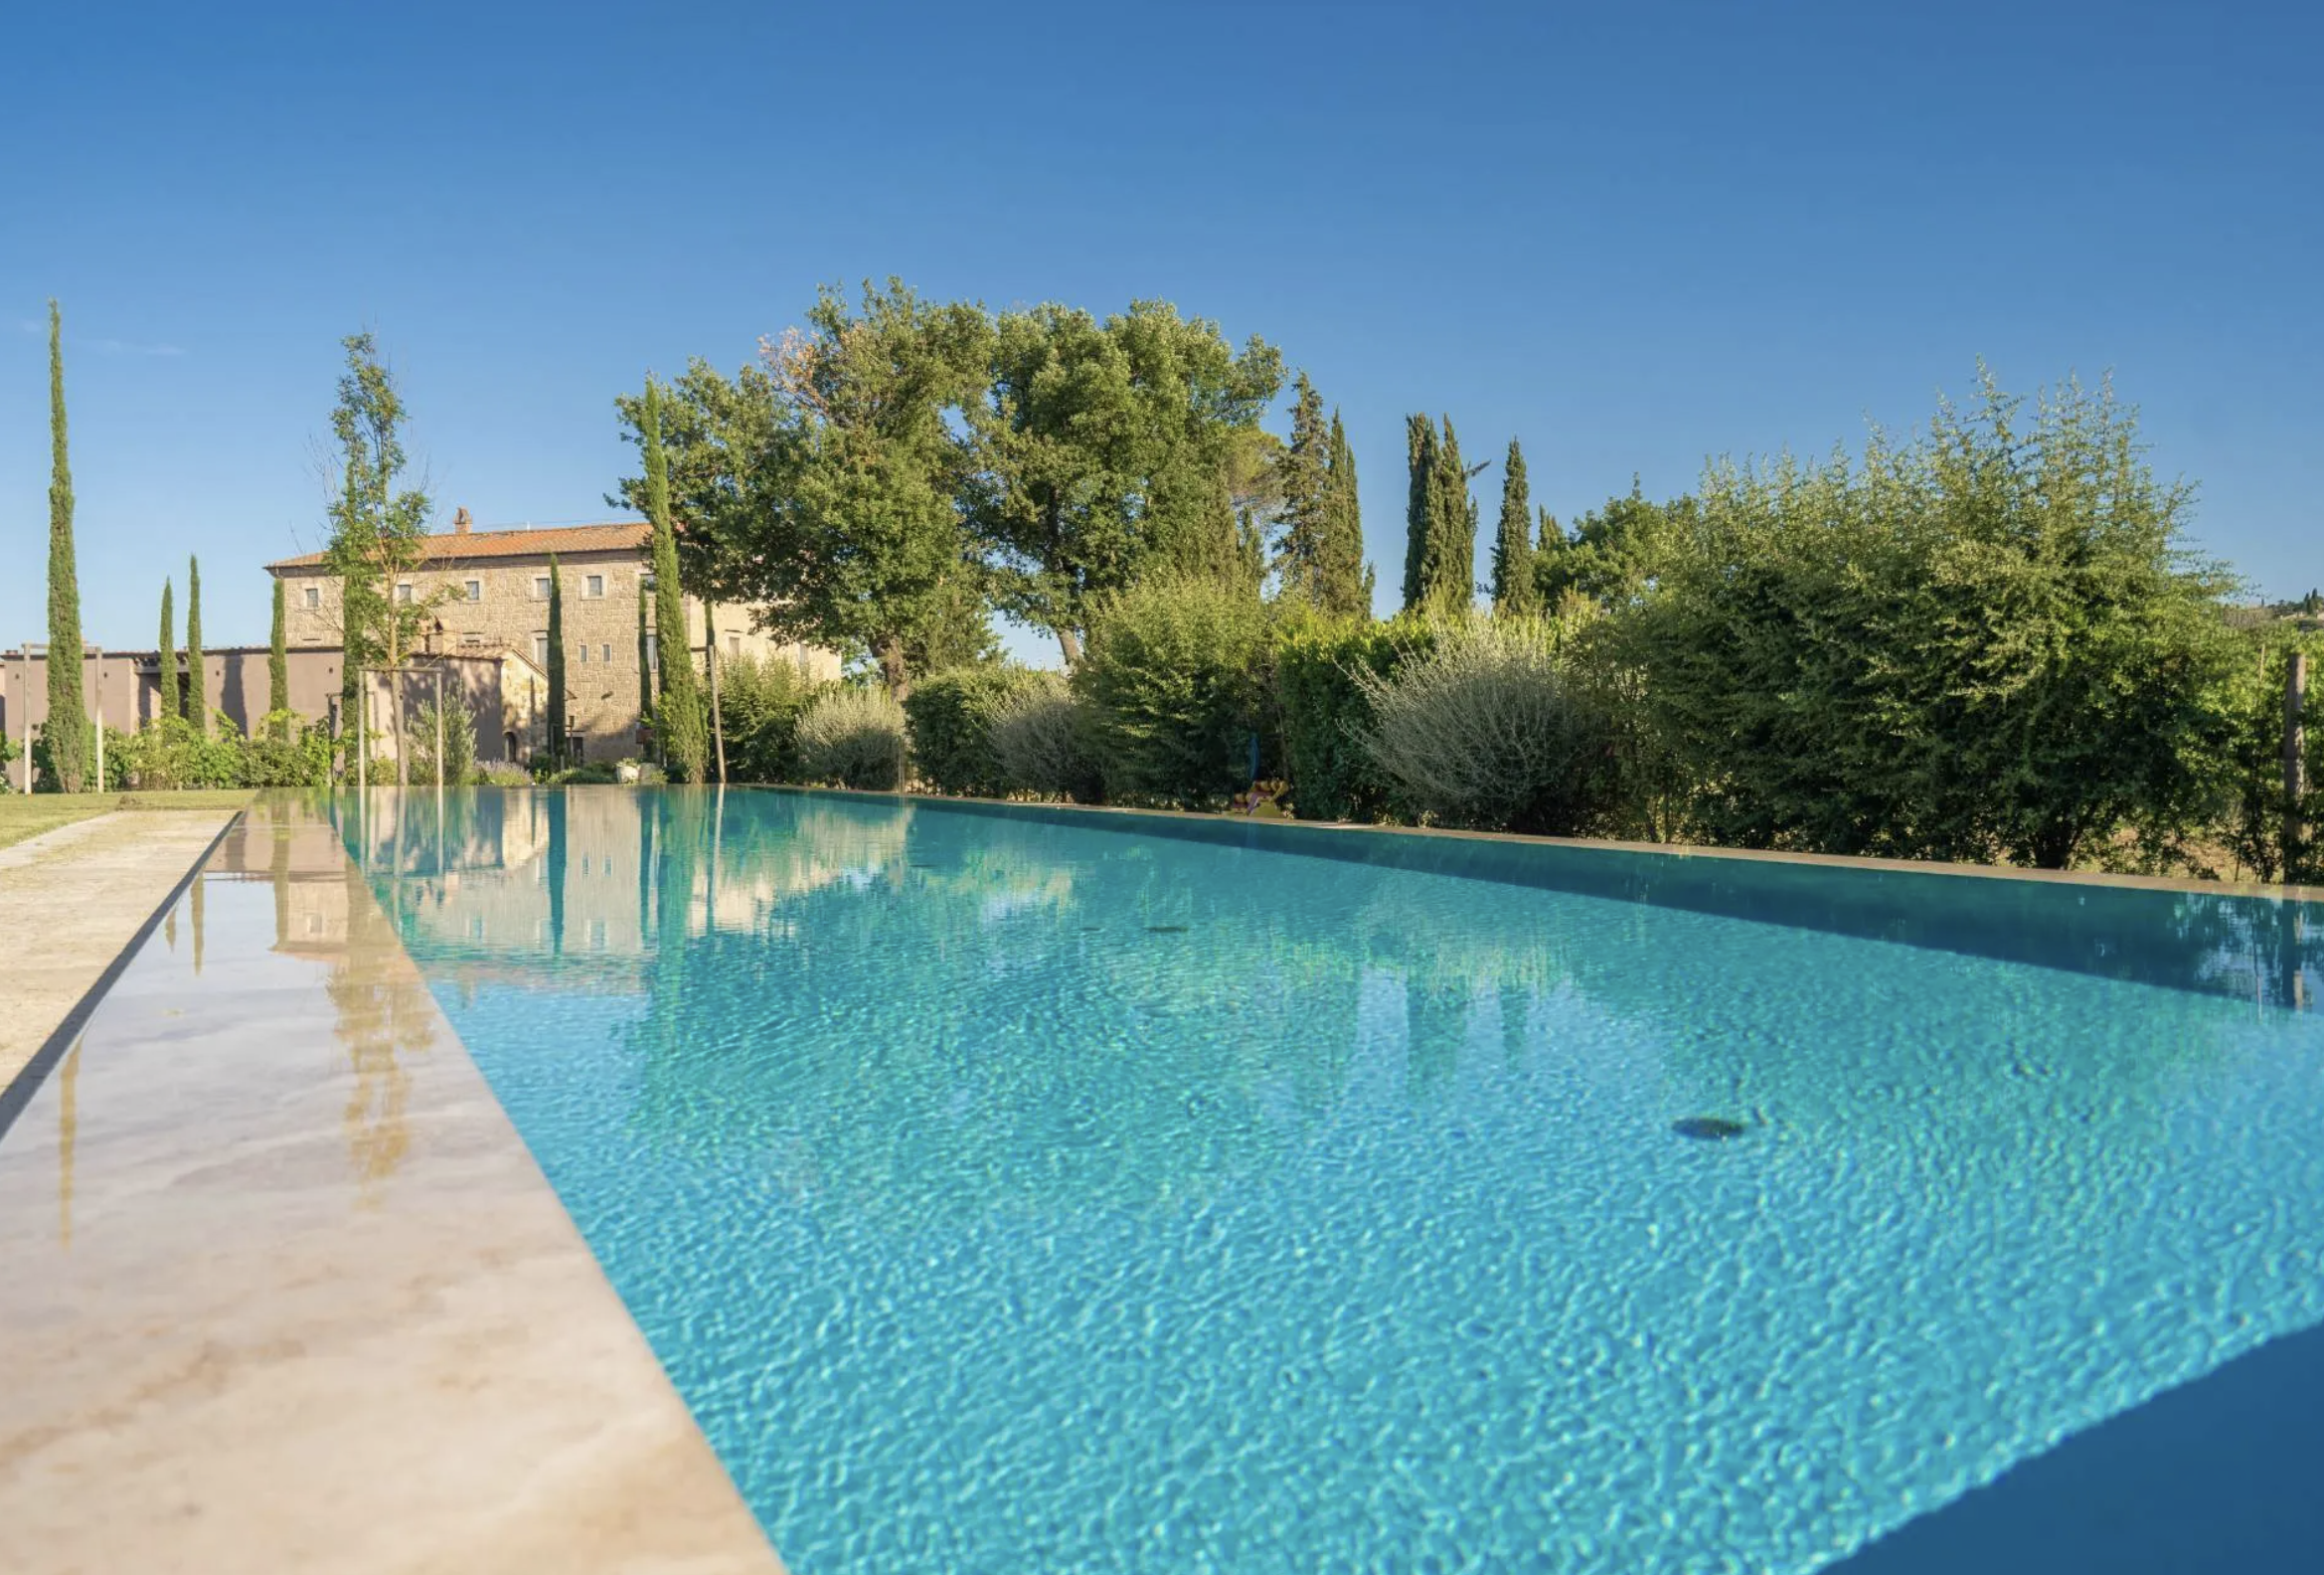 Francis York Villa Travertino: Luxury Villa and Wine Estate in the Heart of Tuscany 15.png